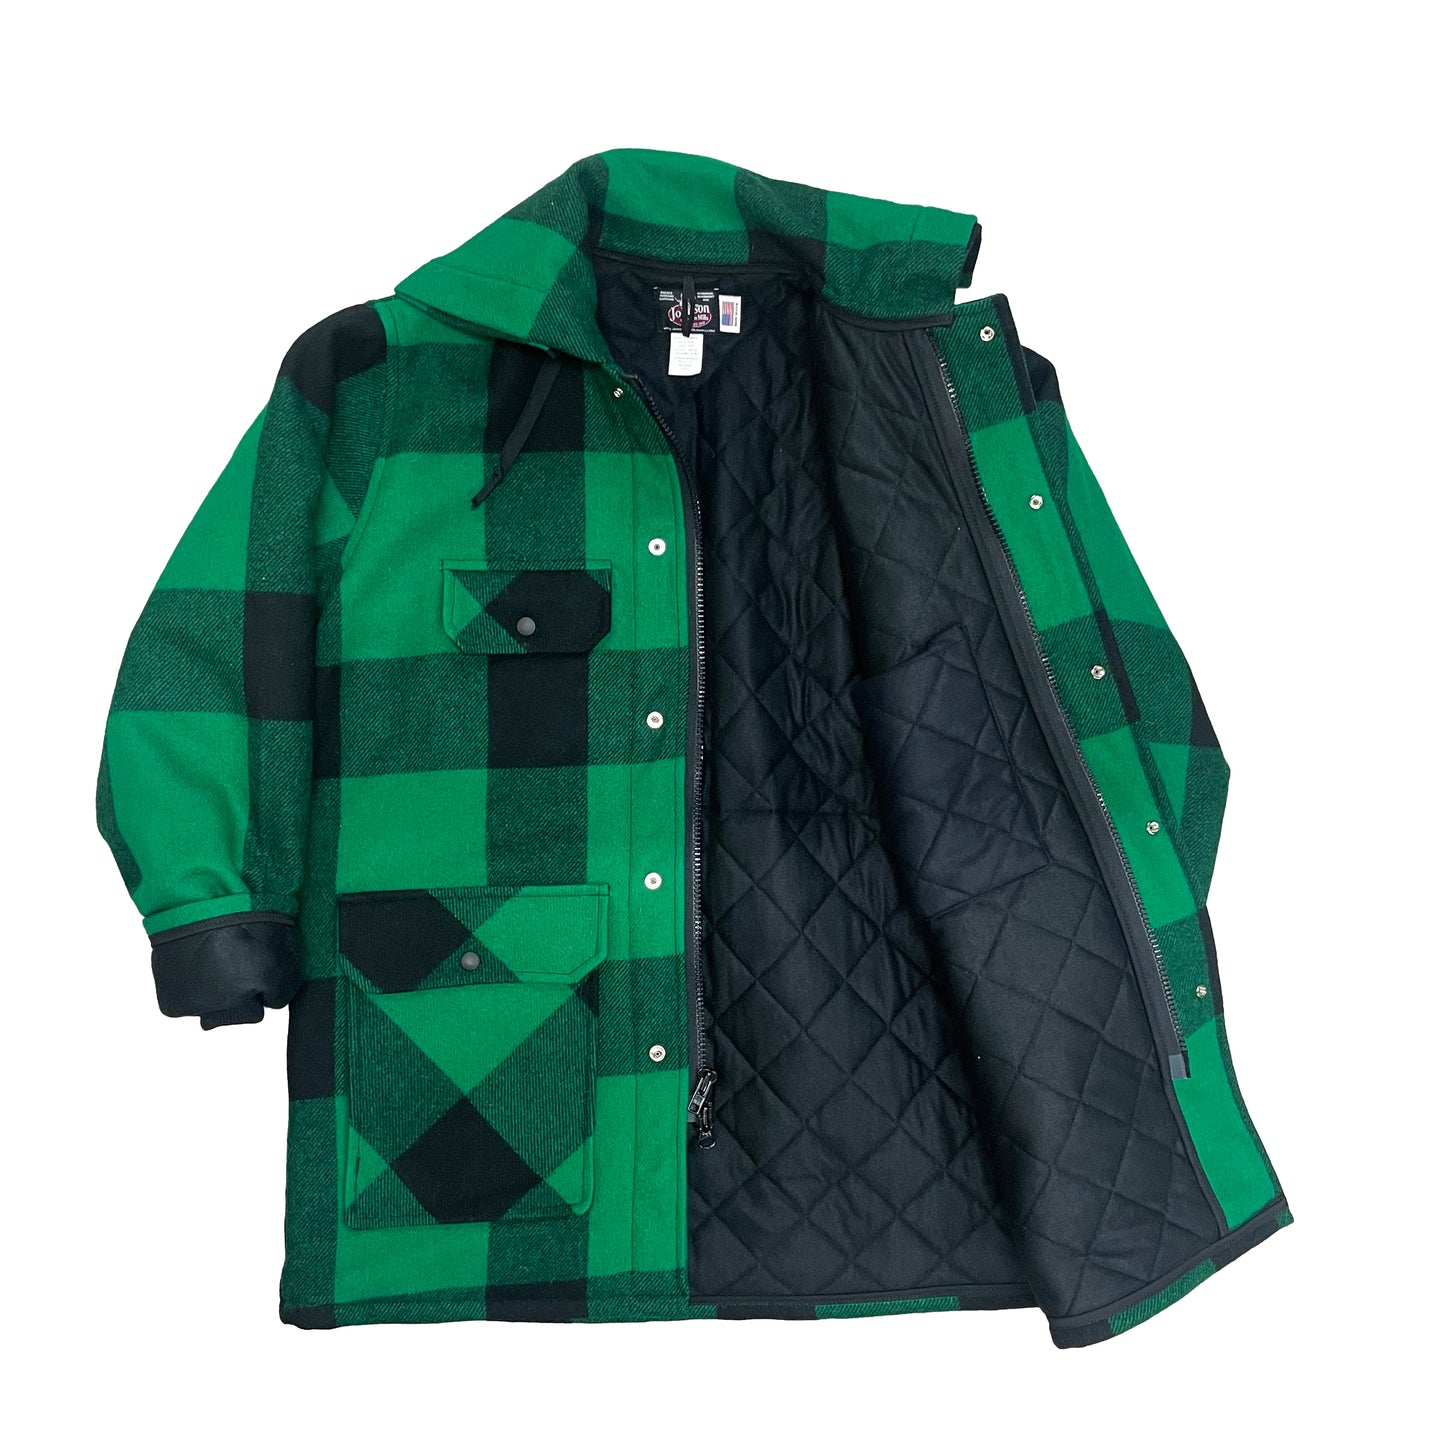 Outdoor Coat, tricot lining, zip hood, 4 pocket & game pouch on the back, green & black squares , interior view